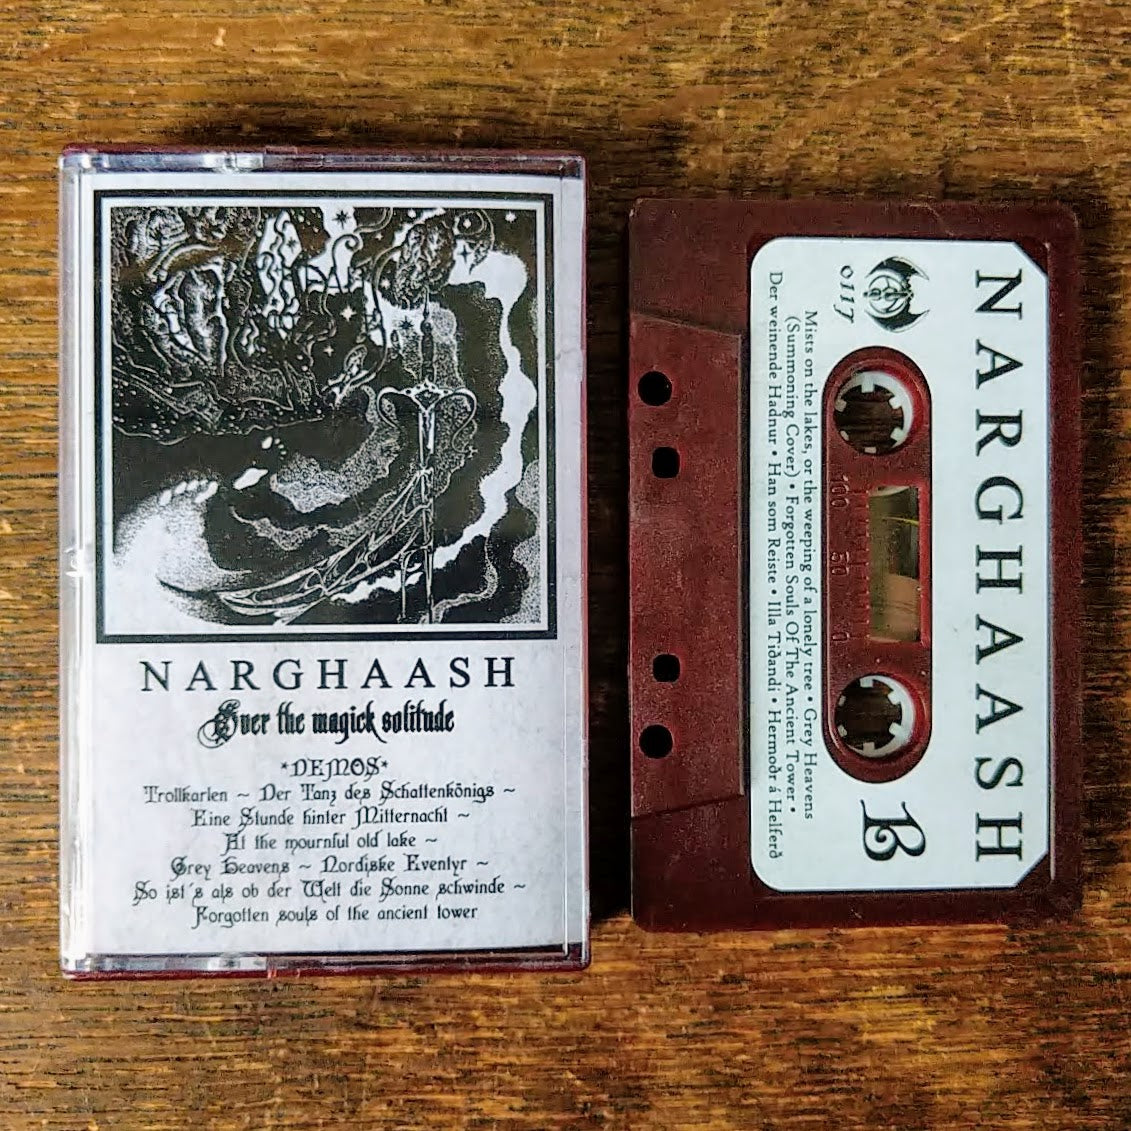 [SOLD OUT] NARGHAASH "Over the Magick Solitude" Cassette Tape (Lim. 100)